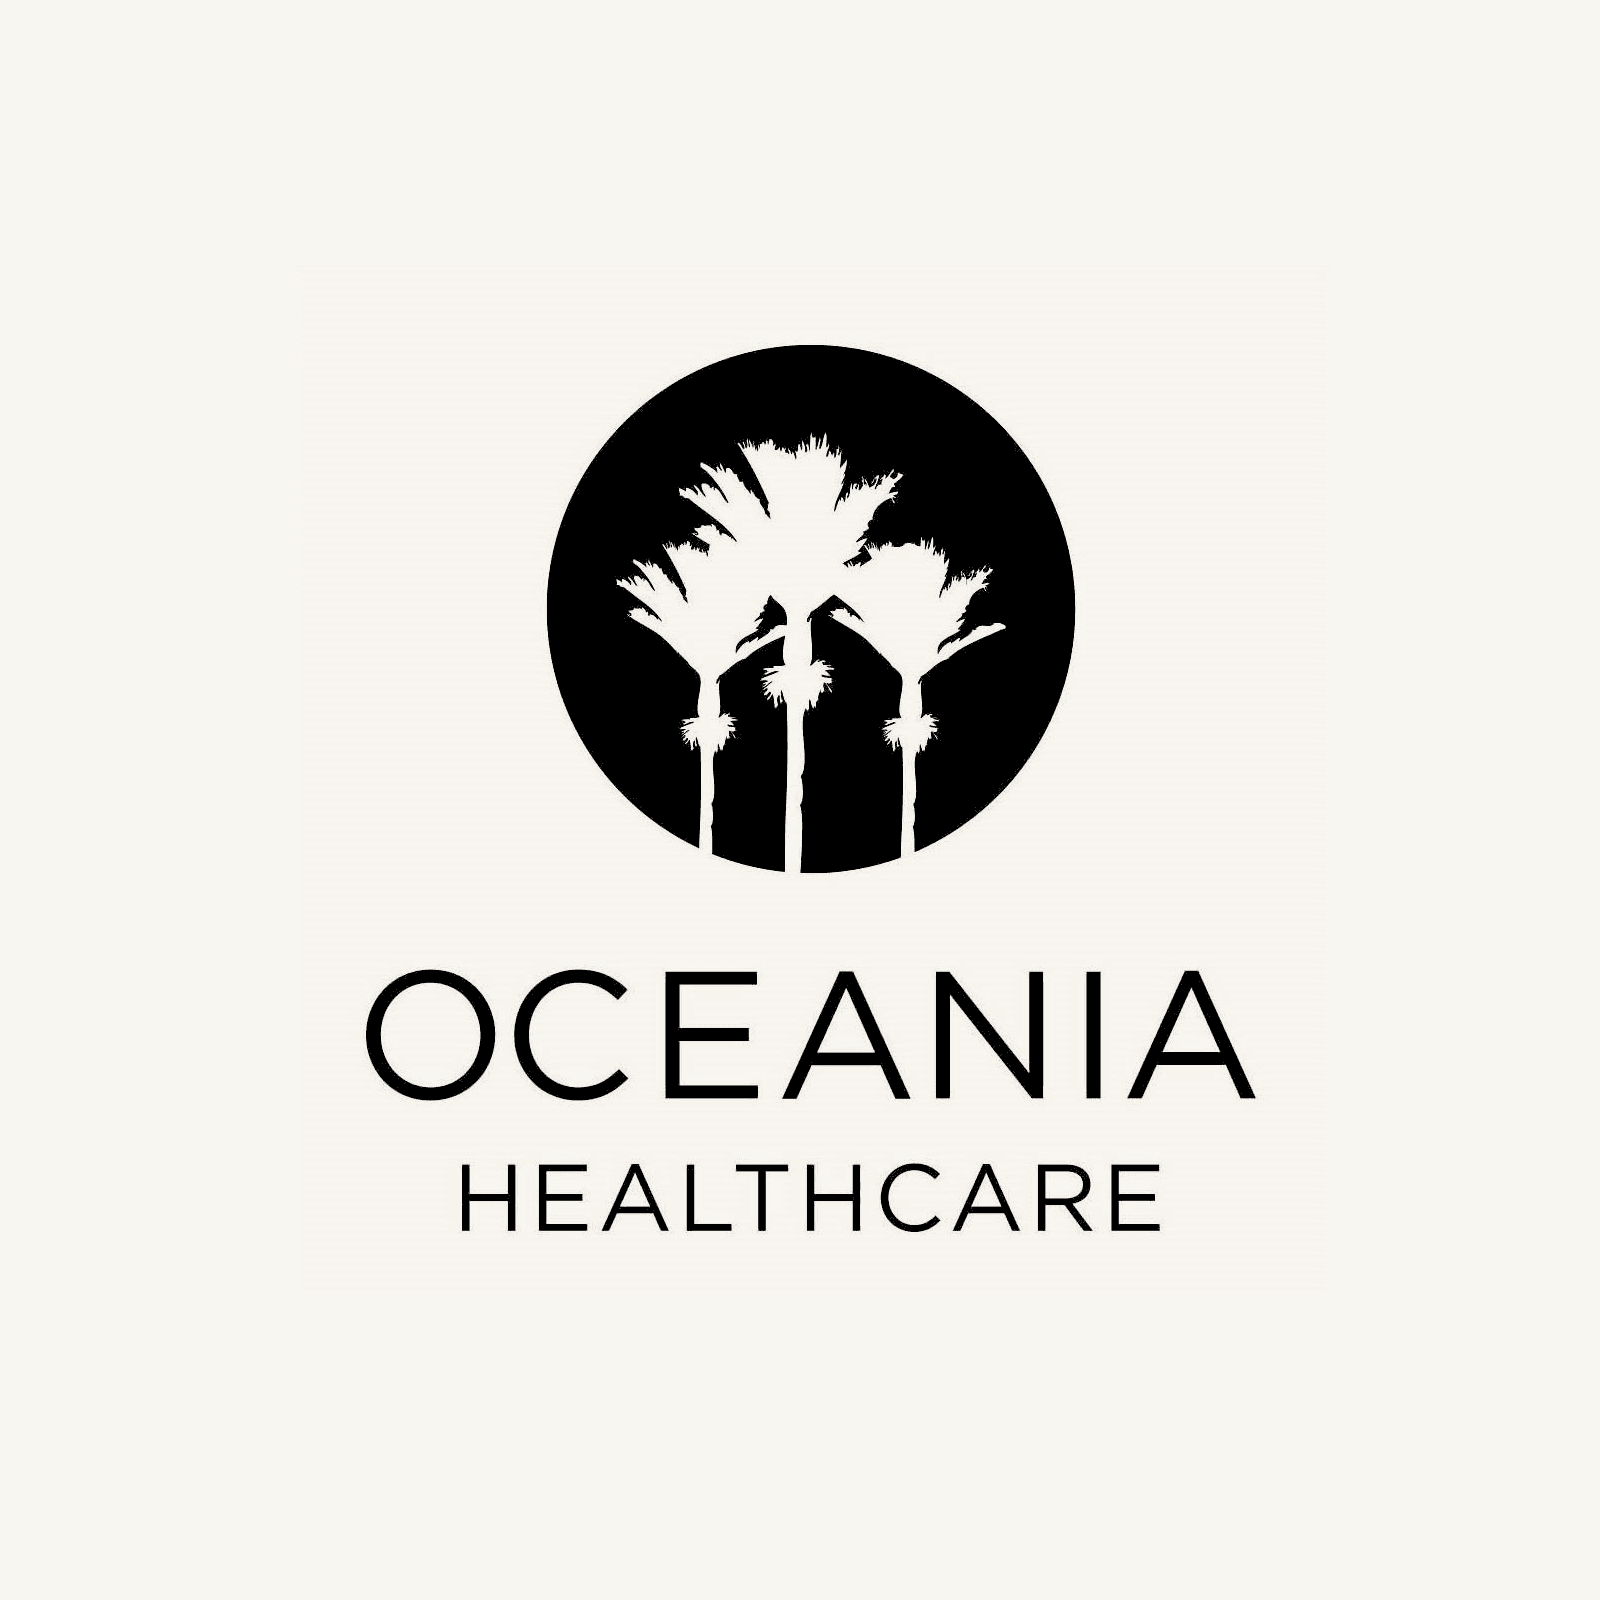 Adrian Curran appointed National Procurement Manager at Oceania Healthcare